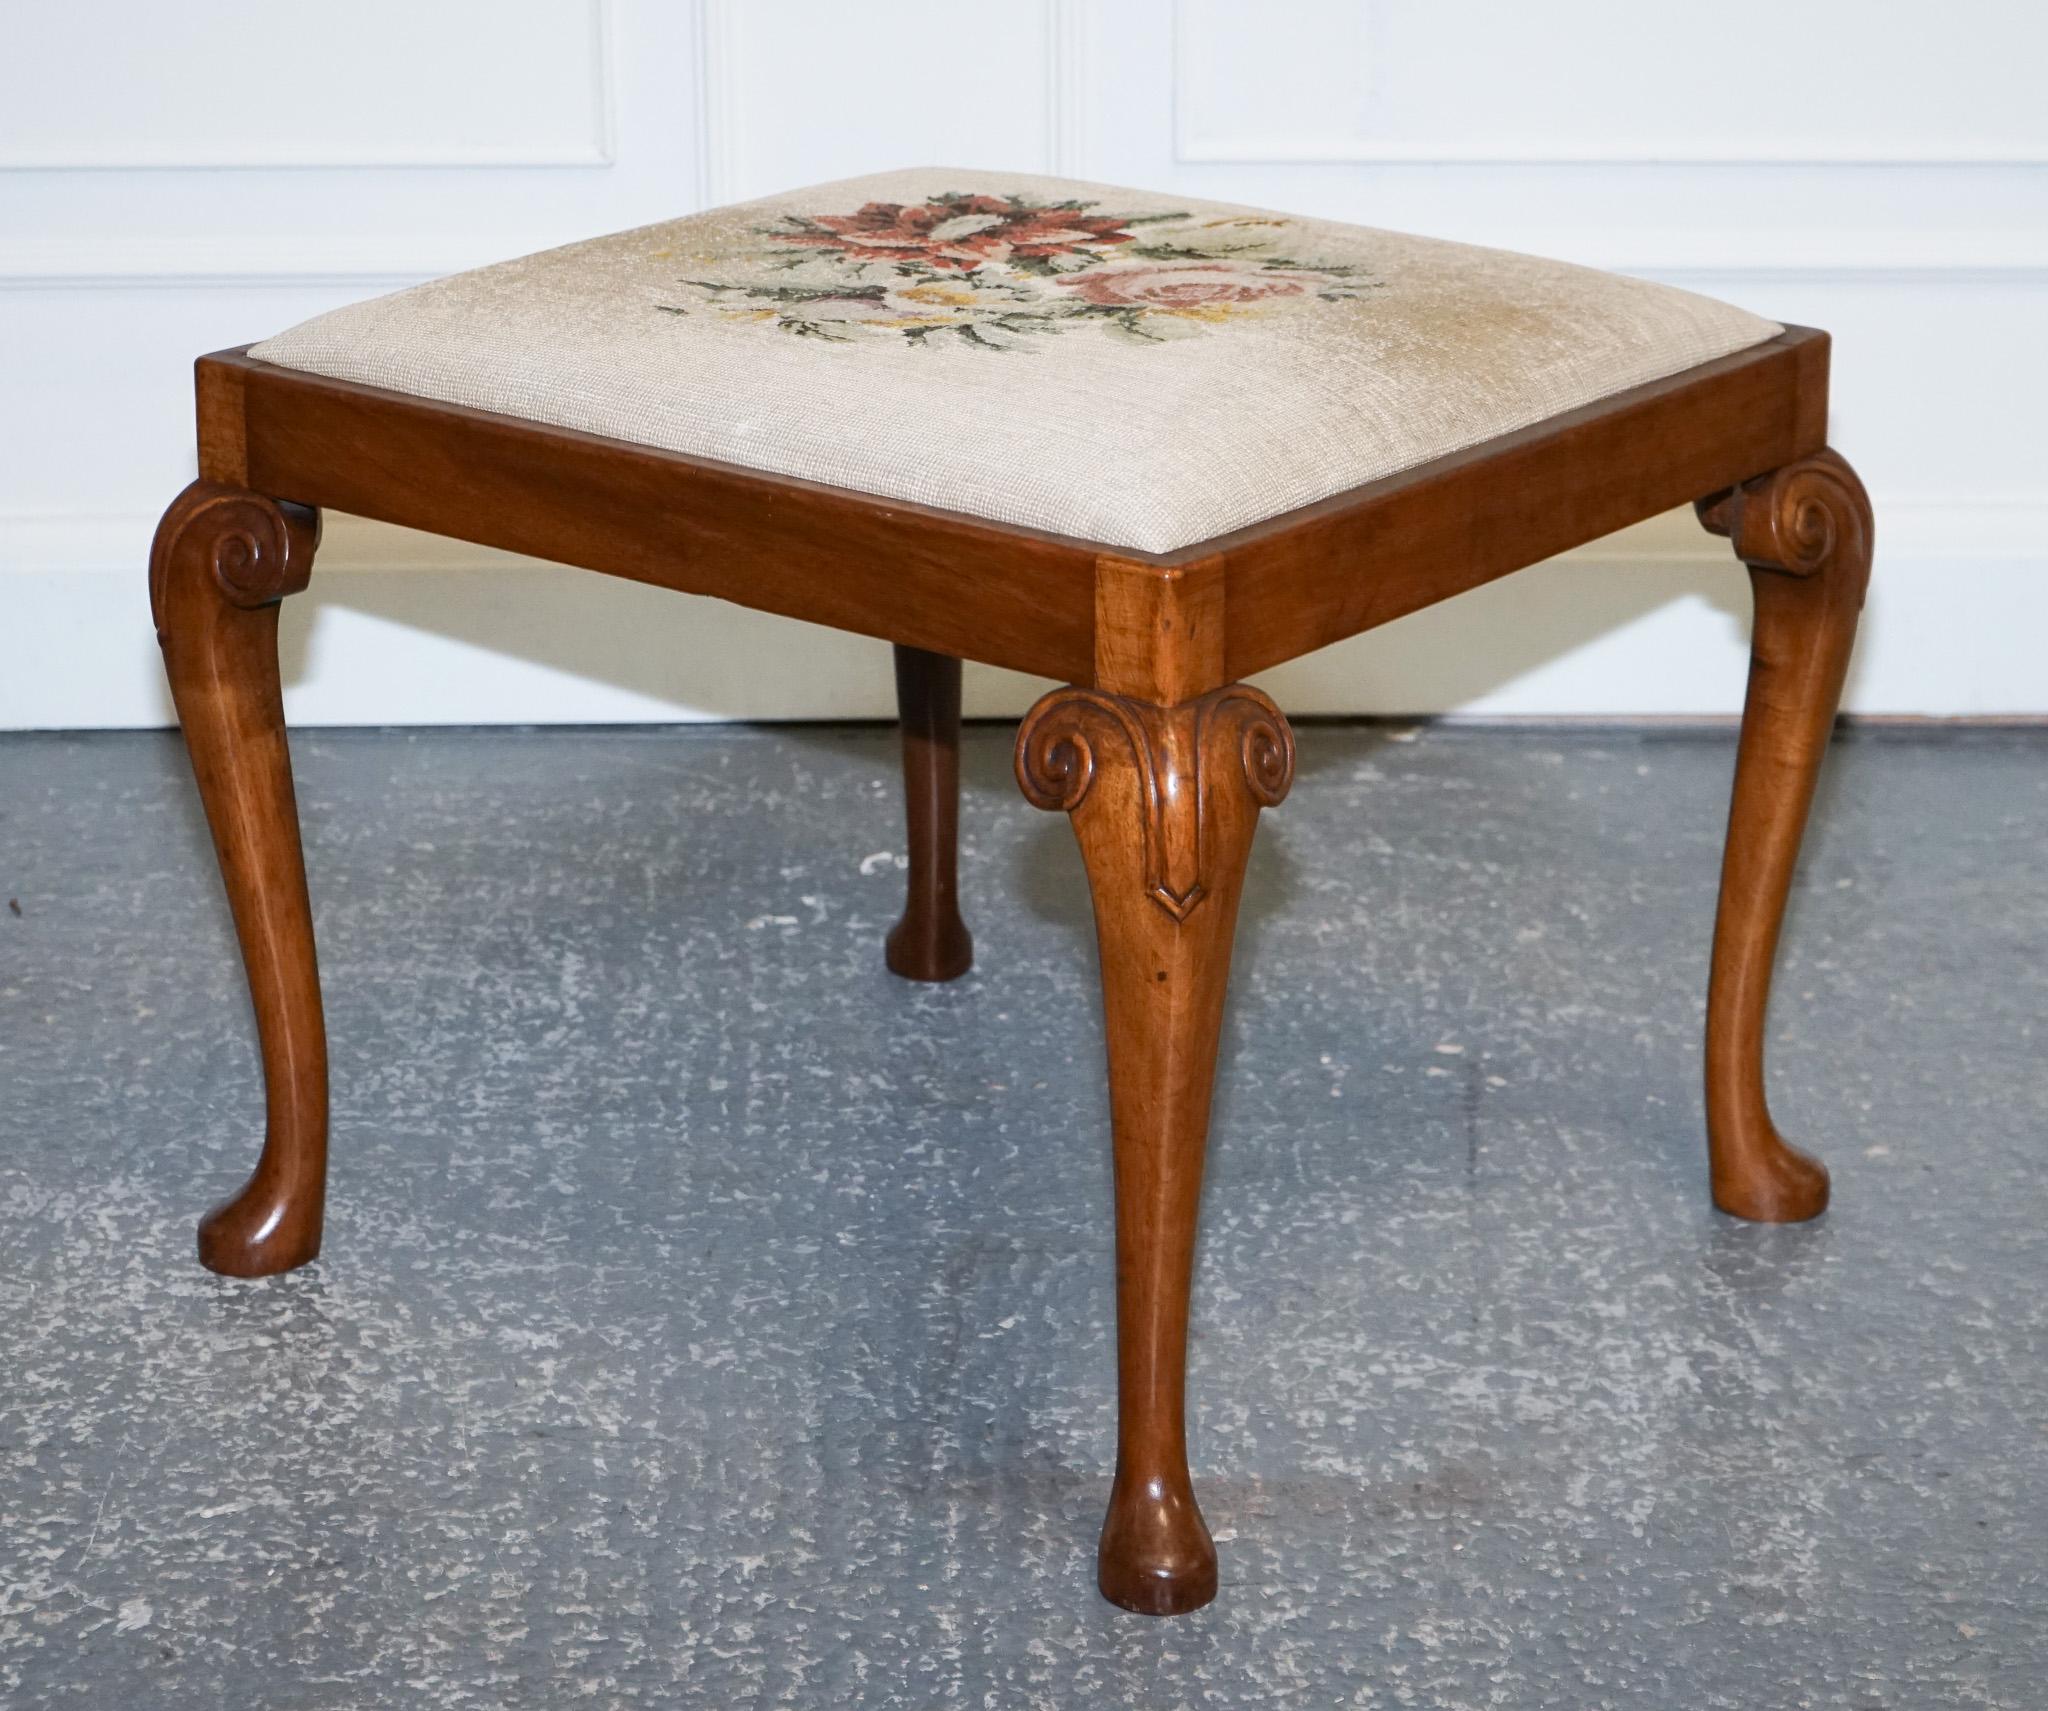 Lovely Decorative Victorian Hand Carved Queen Anne Legs Piano Stool In Good Condition For Sale In Pulborough, GB